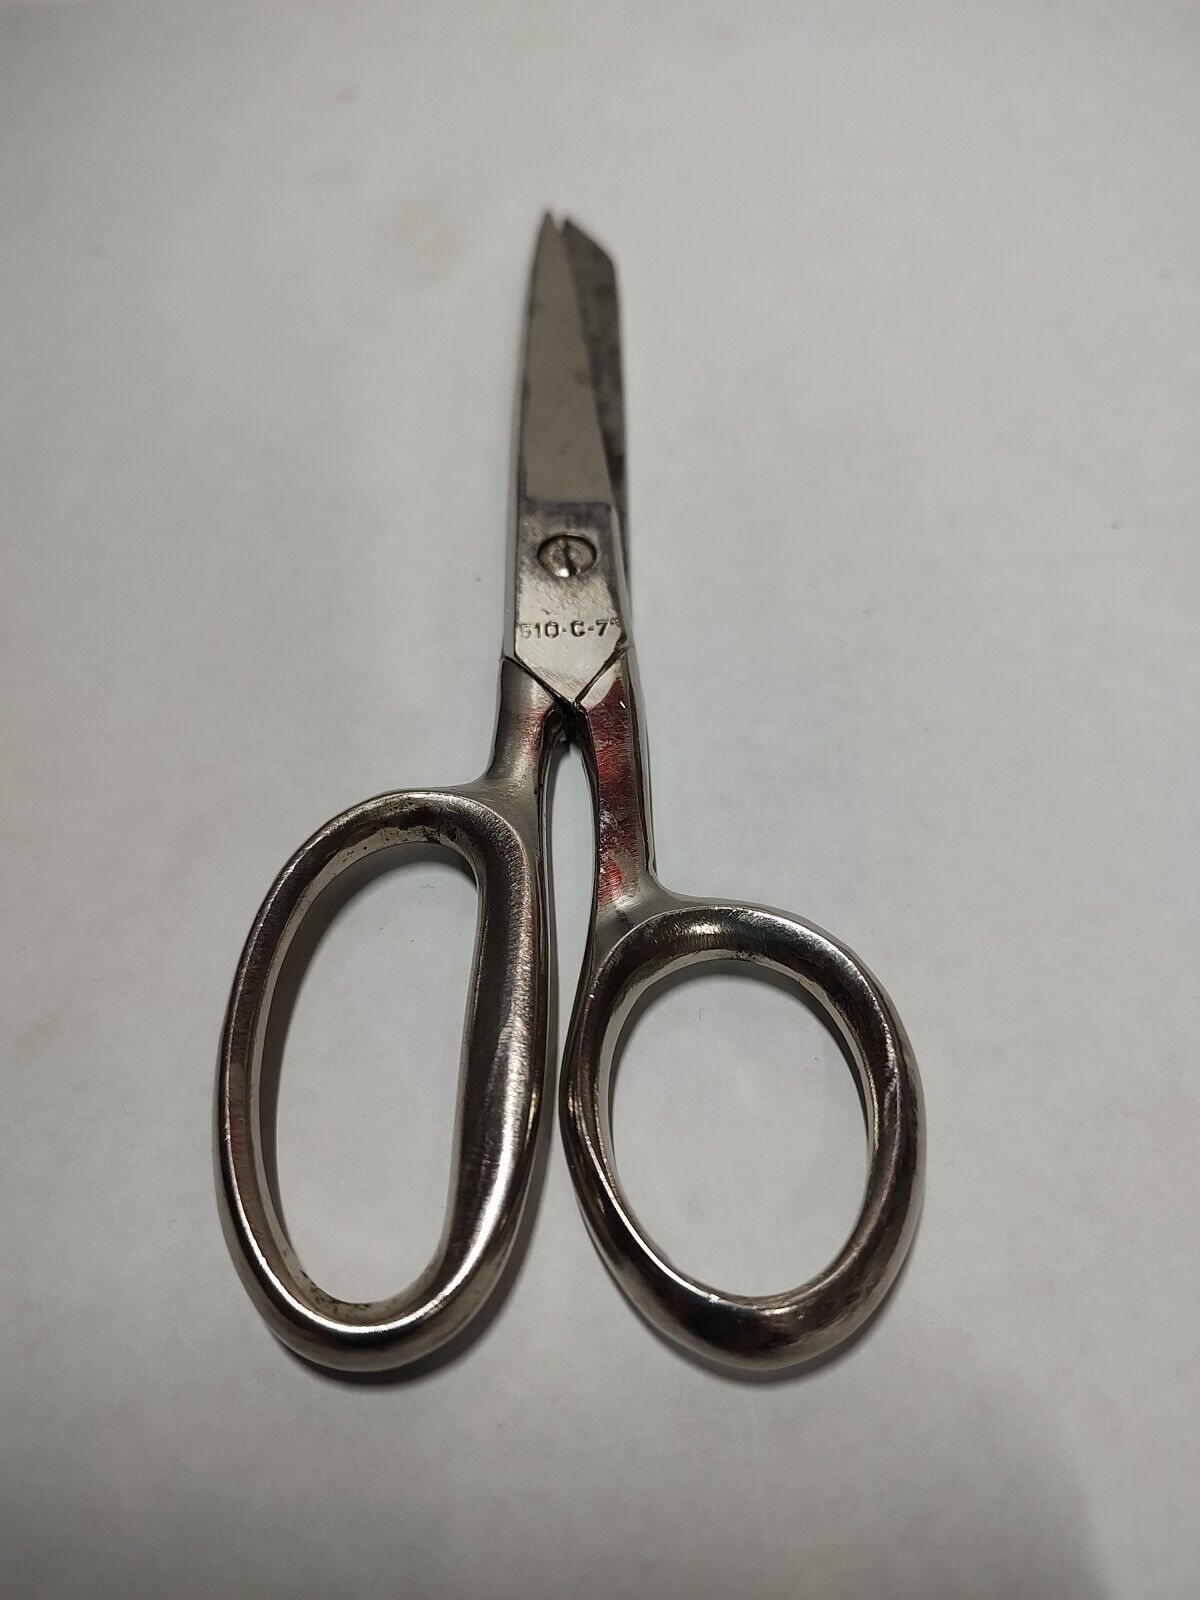 VINTAGE 7\' HOUSEHOLD SCISSORS Made in Italy HOT DROP FORGE STEEL #530-C-7